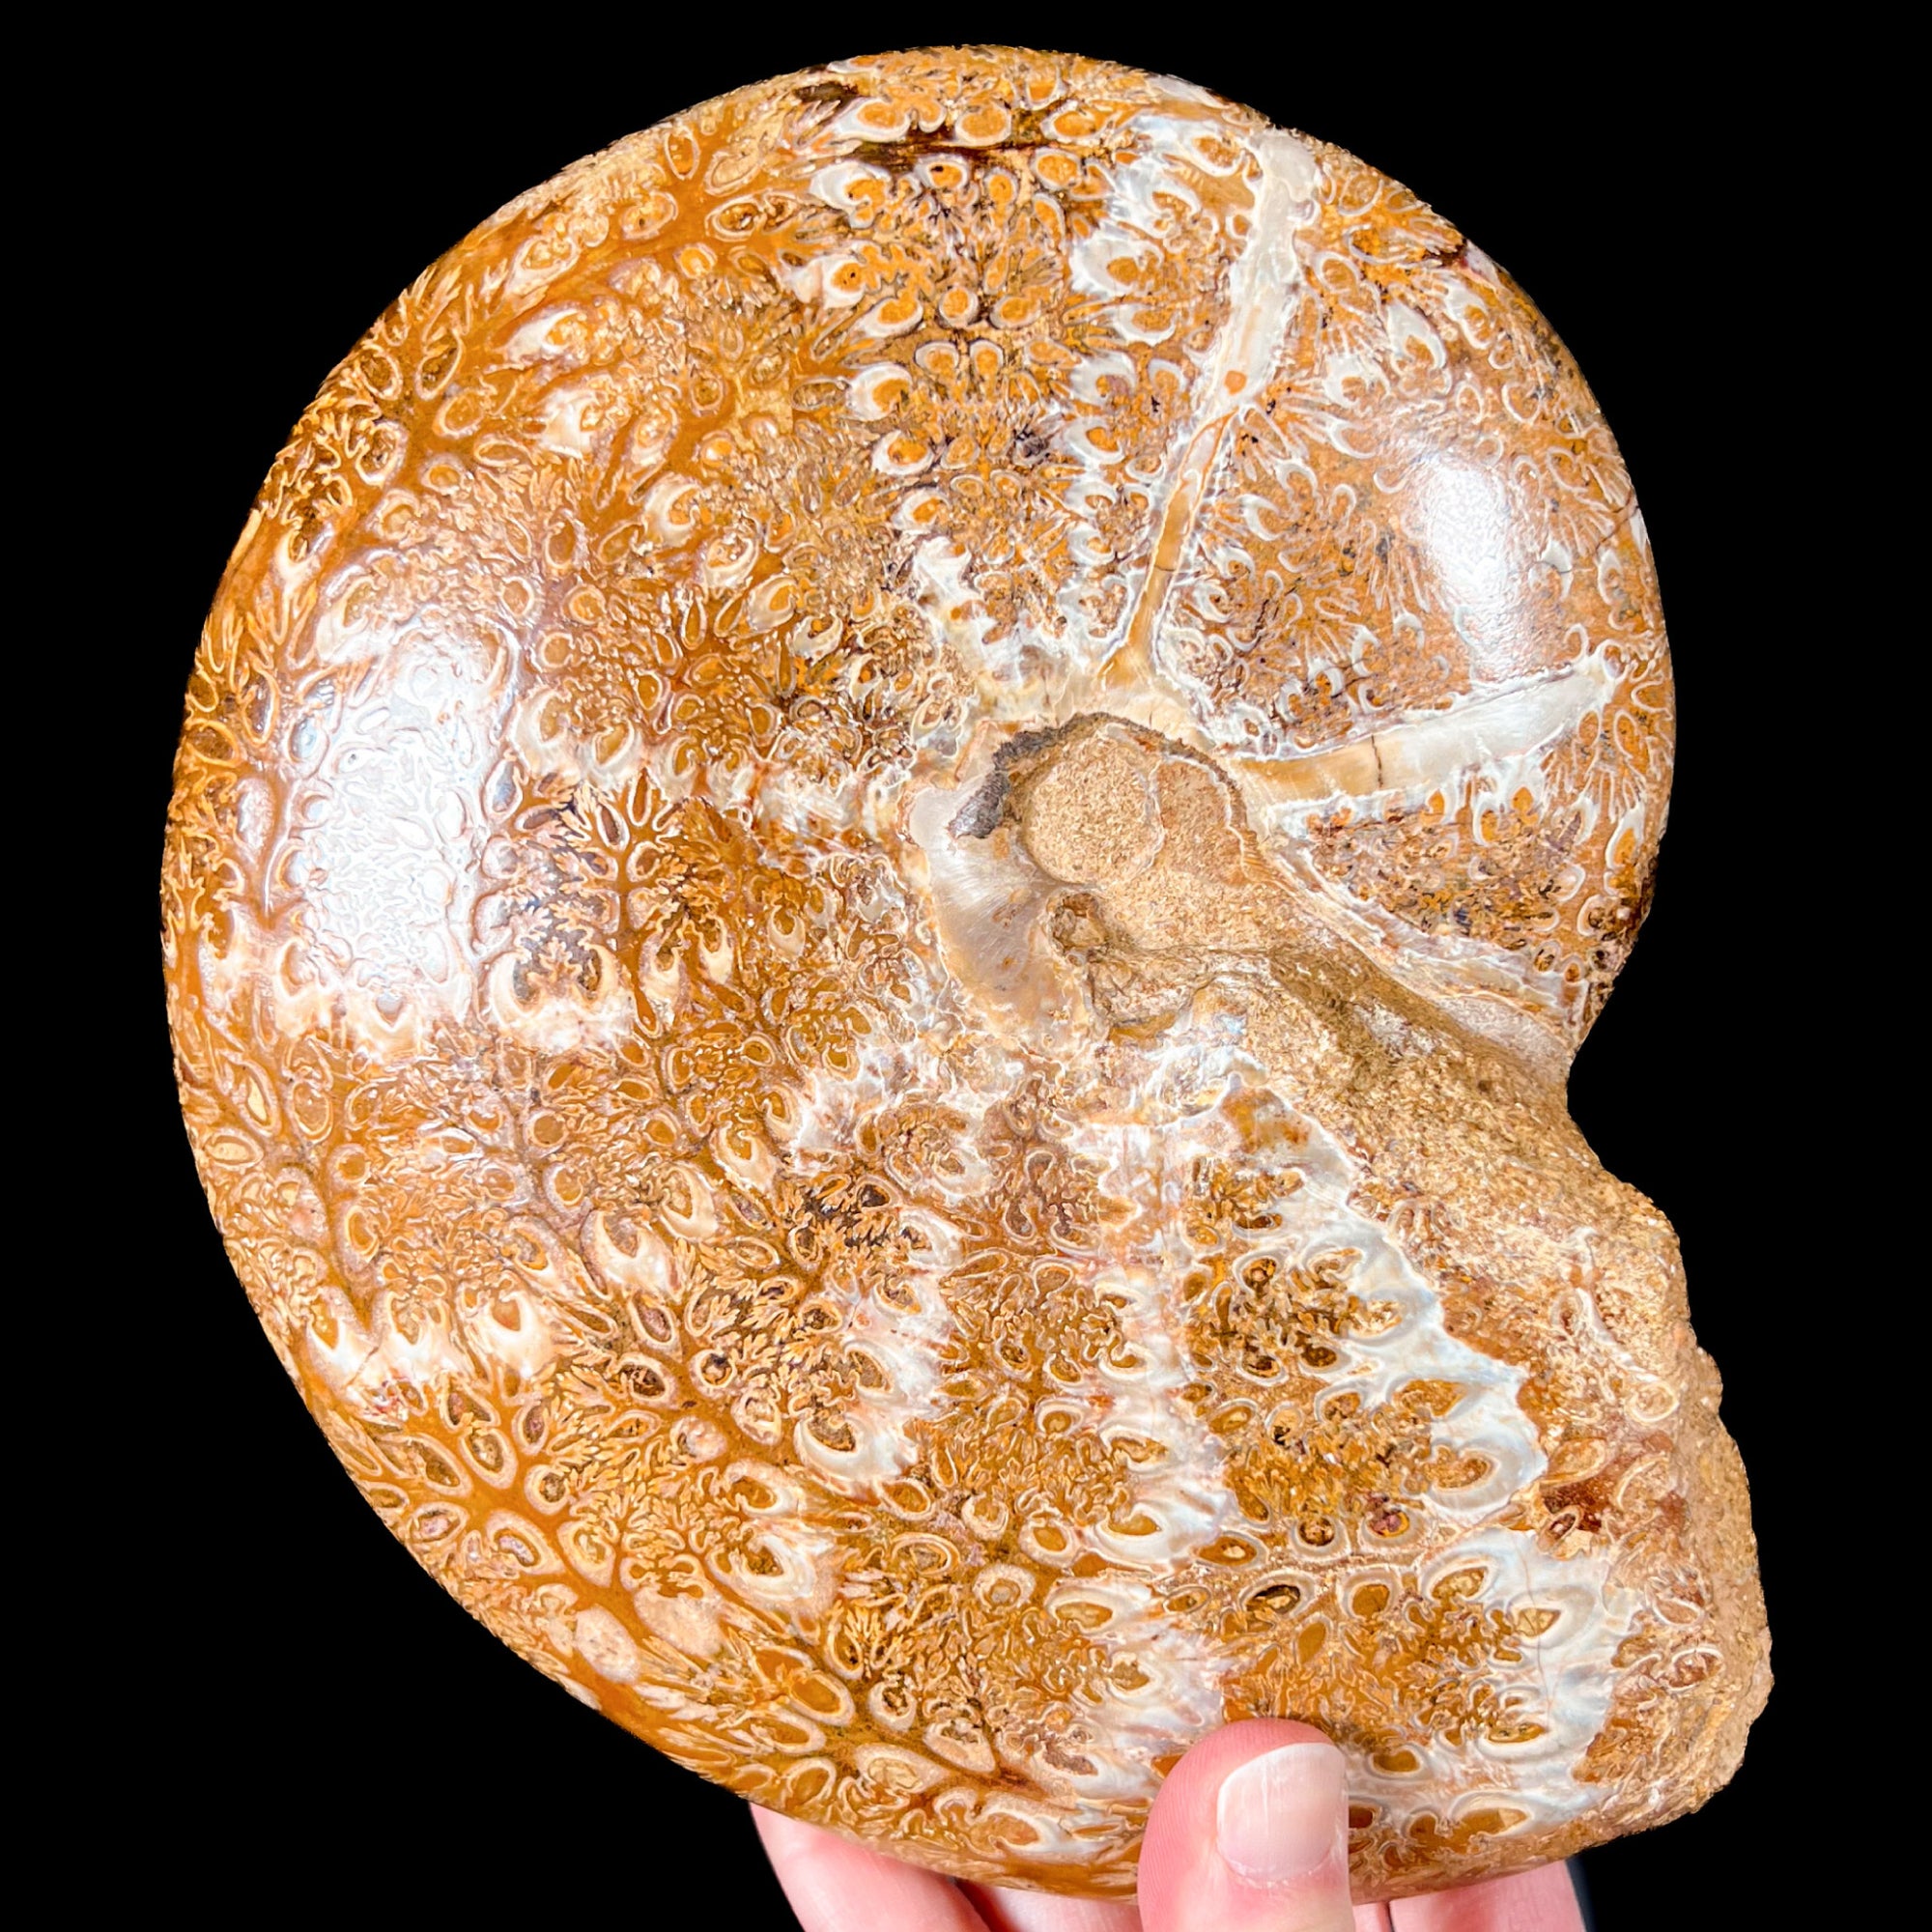 Large Fossil Ammonite - Phylloceras sp.